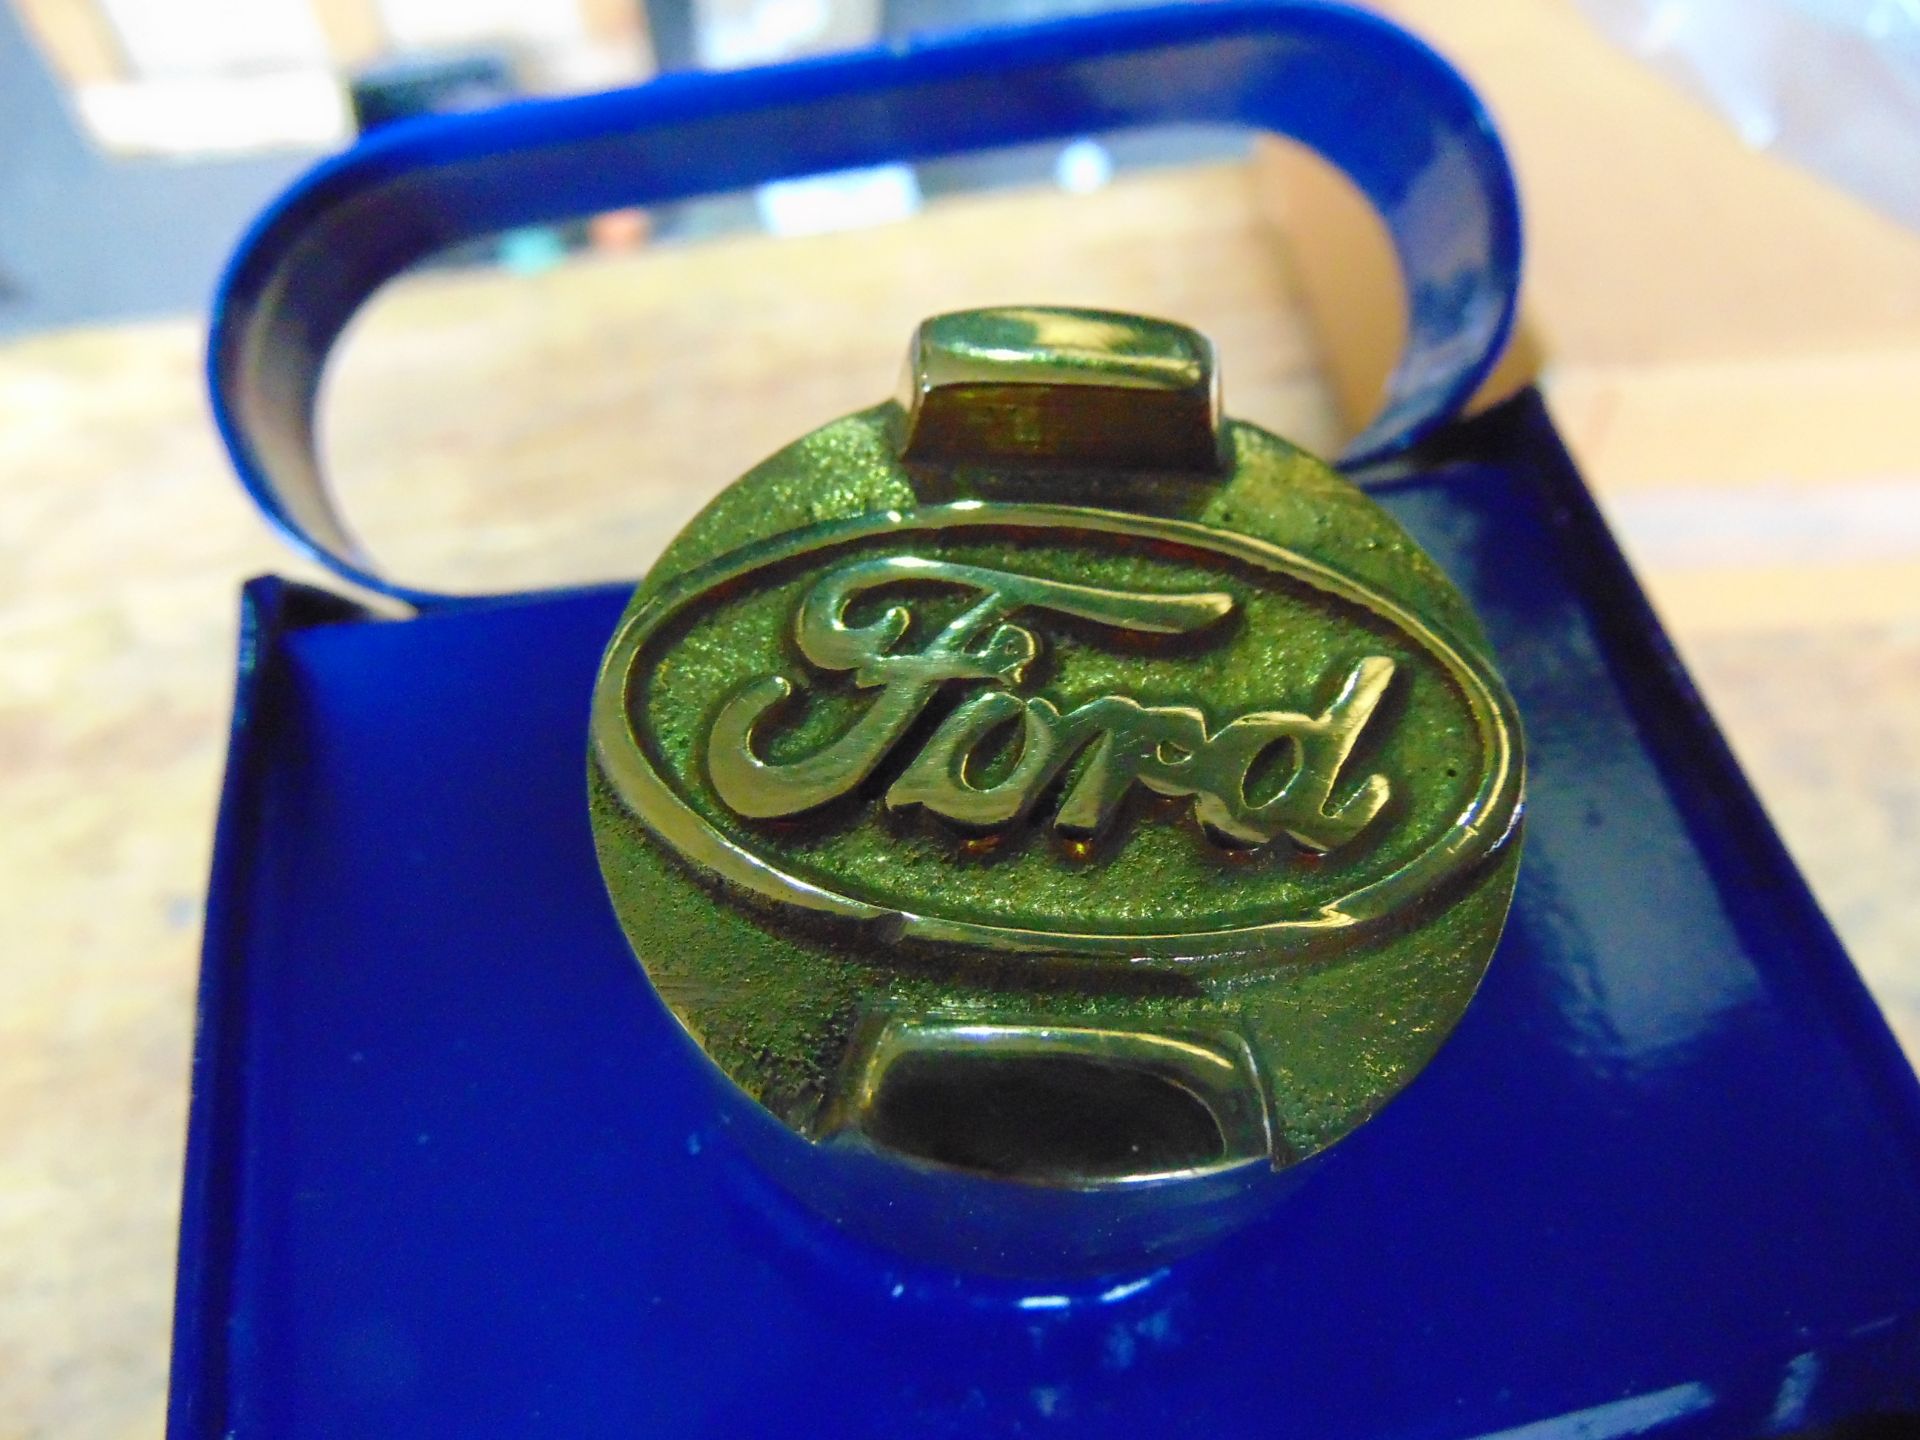 Ford Hand Painted 1 Gall Fuel/Oil Can with Brass Cap - Image 3 of 4